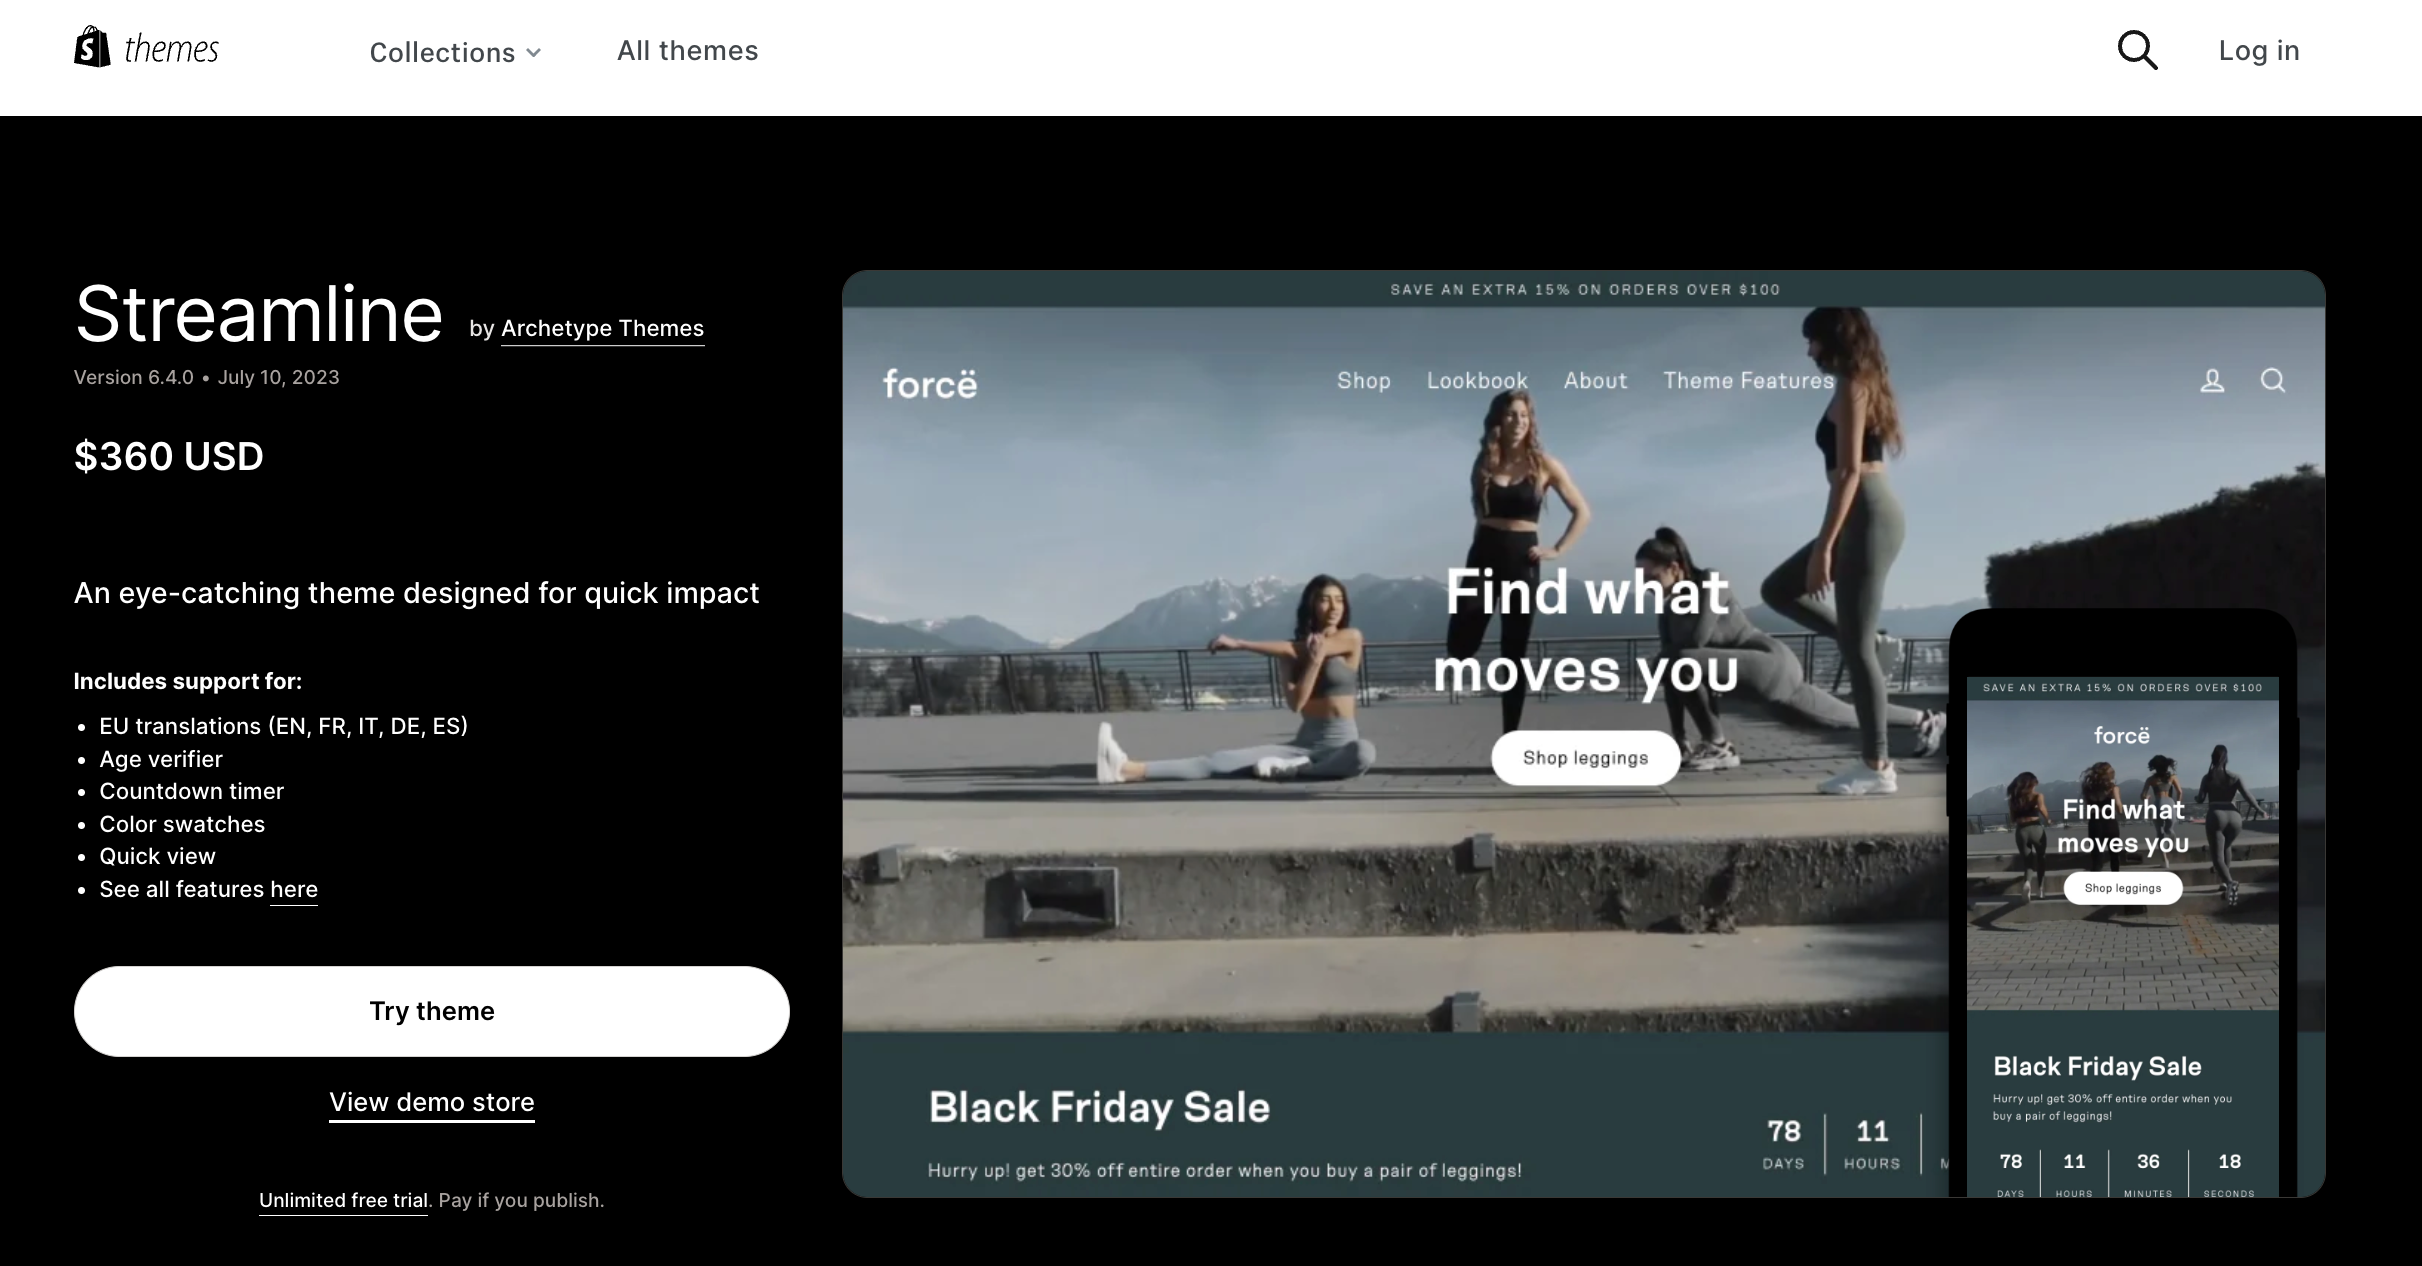 The Streamline Shopify theme stands out as one of the top choices for clothing on Shopify